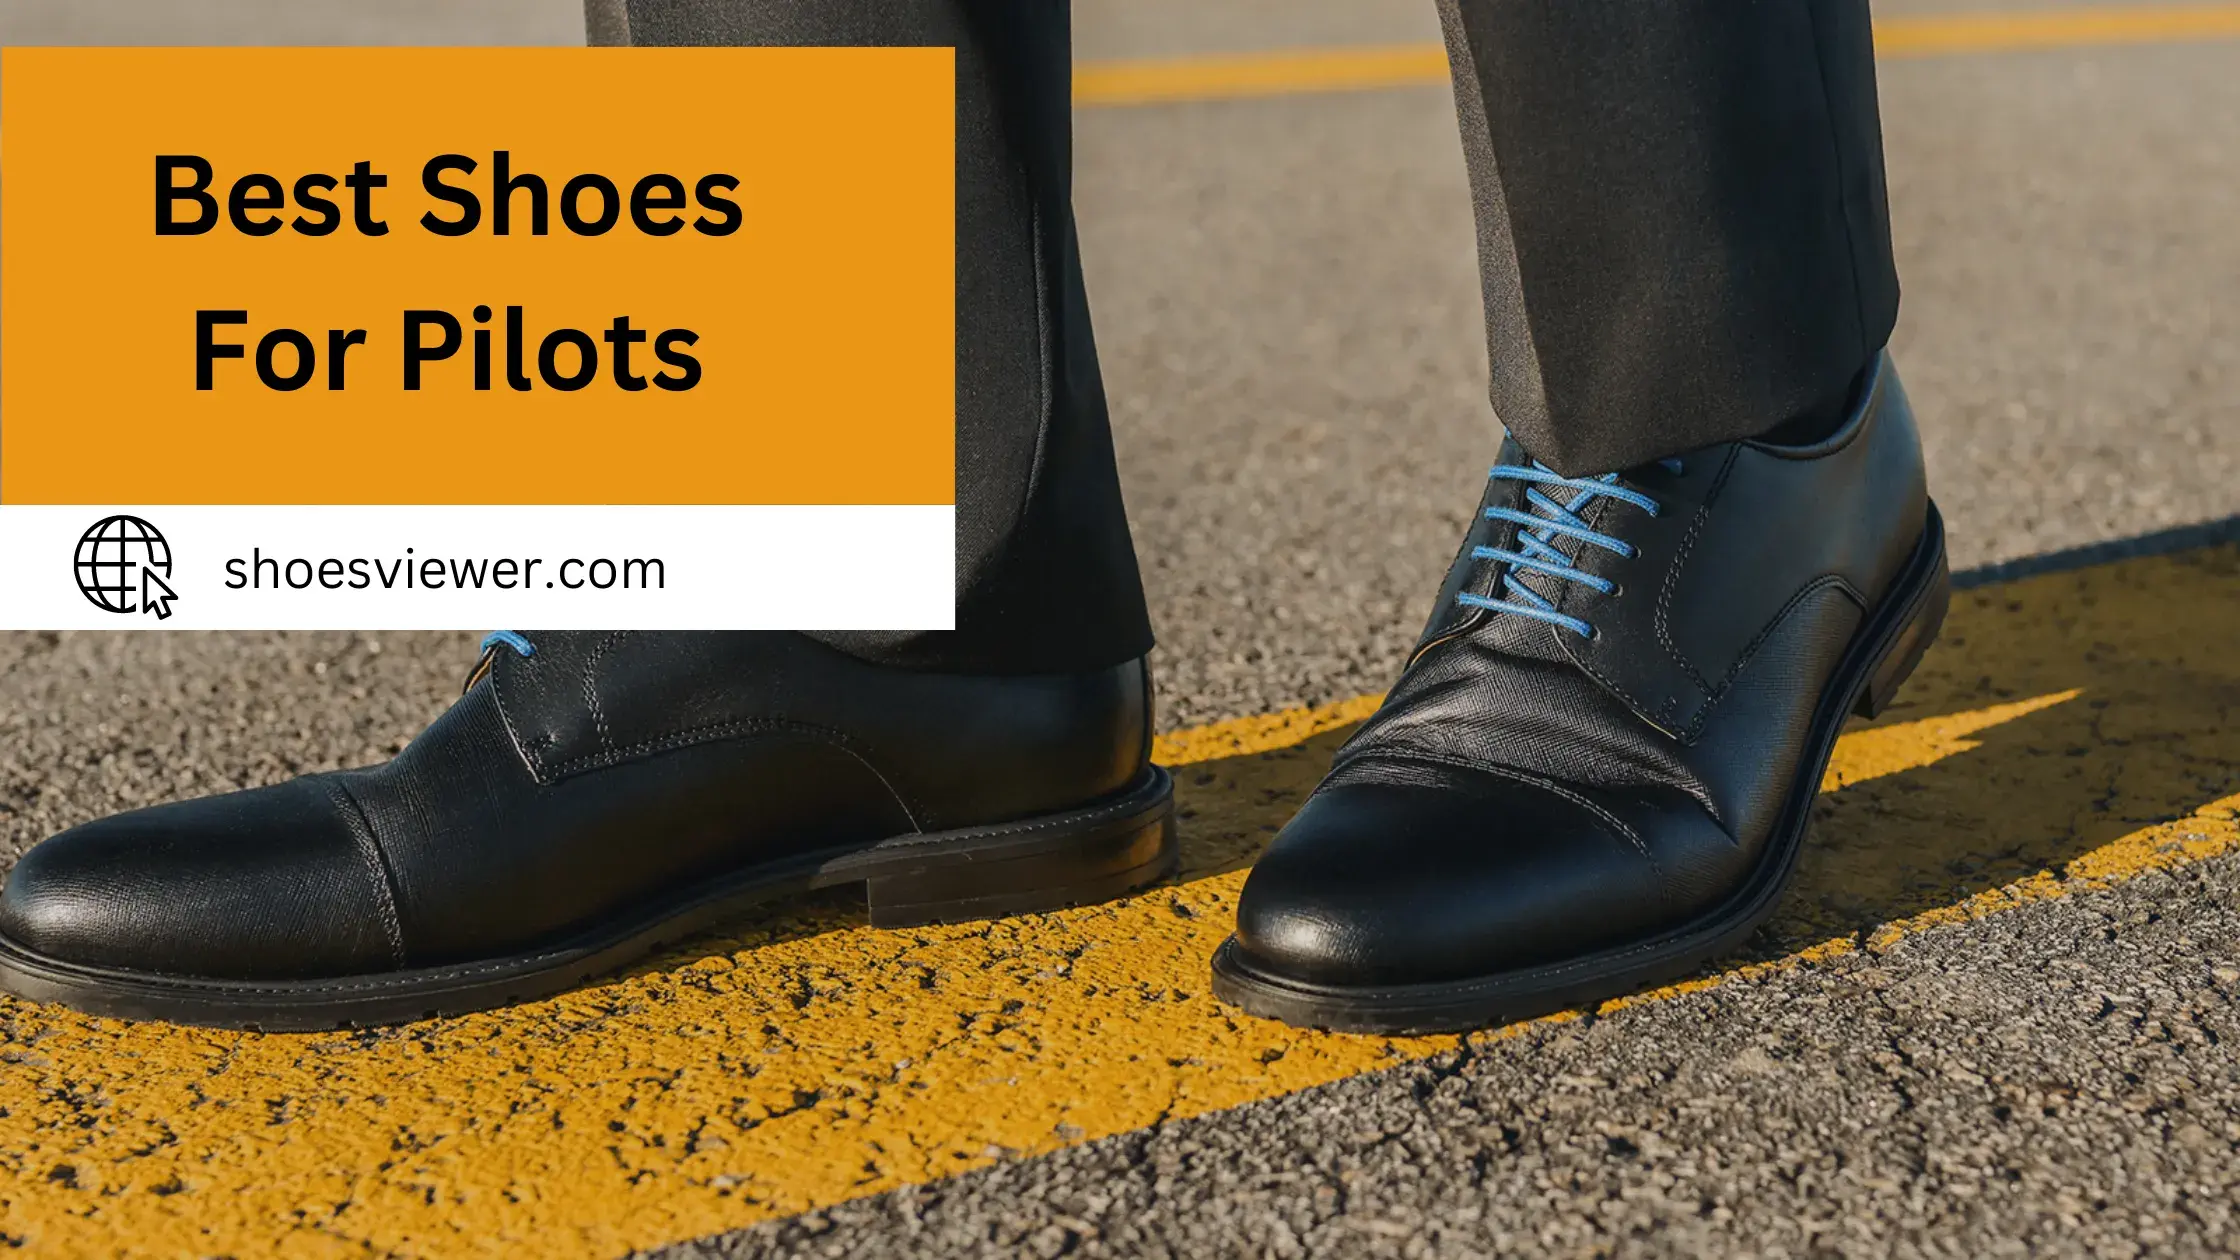 Best Shoes For Pilots - A Comprehensive Guide